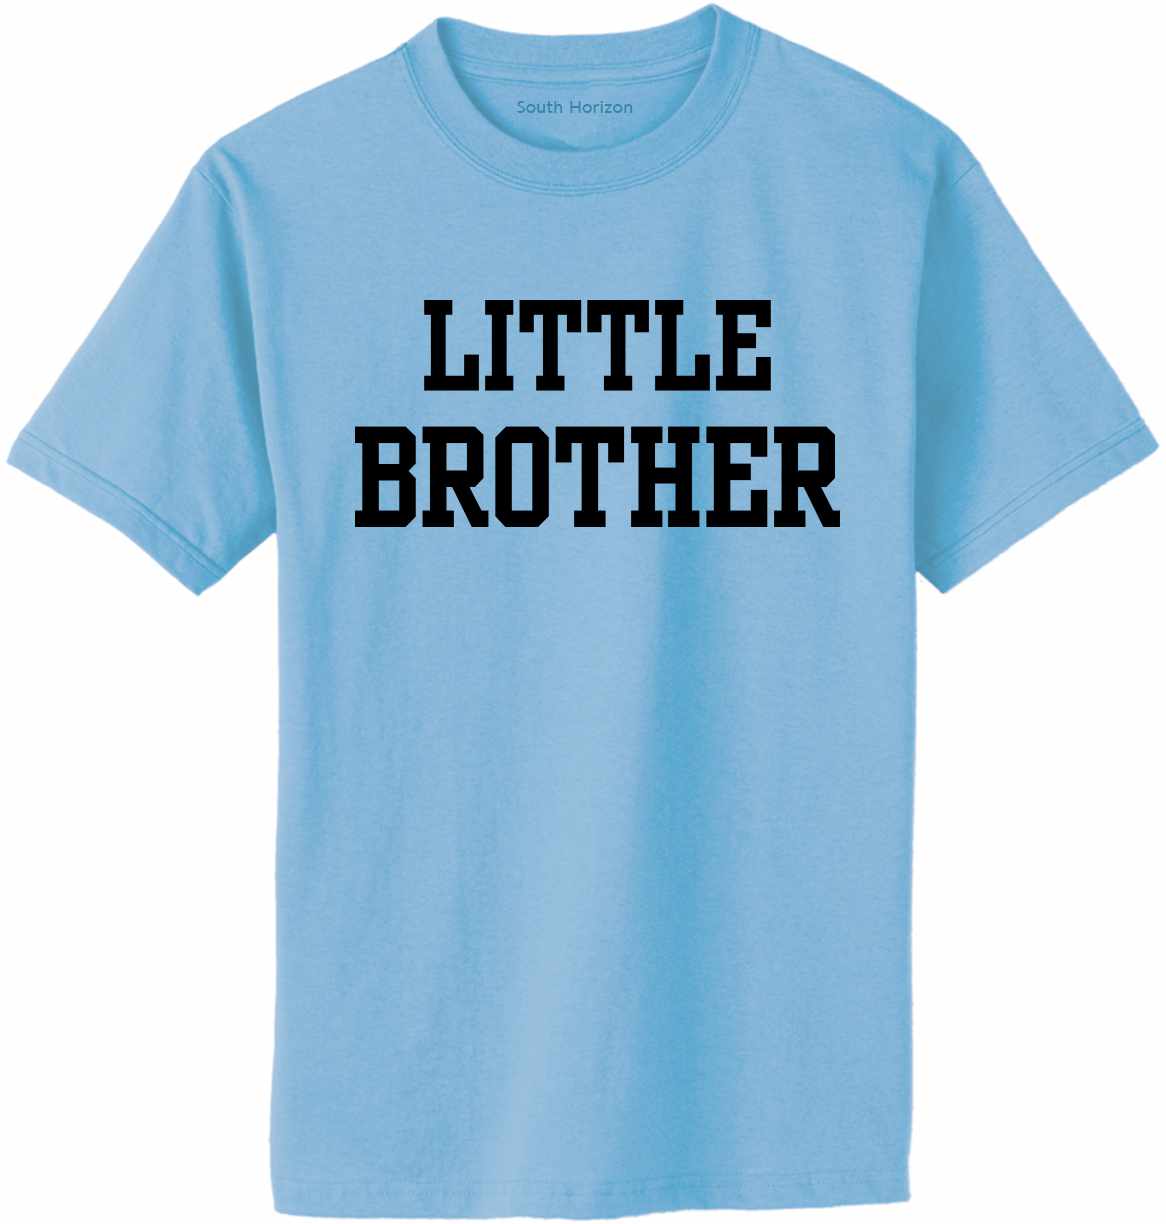 LITTLE BROTHER Adult T-Shirt (#1111-1)